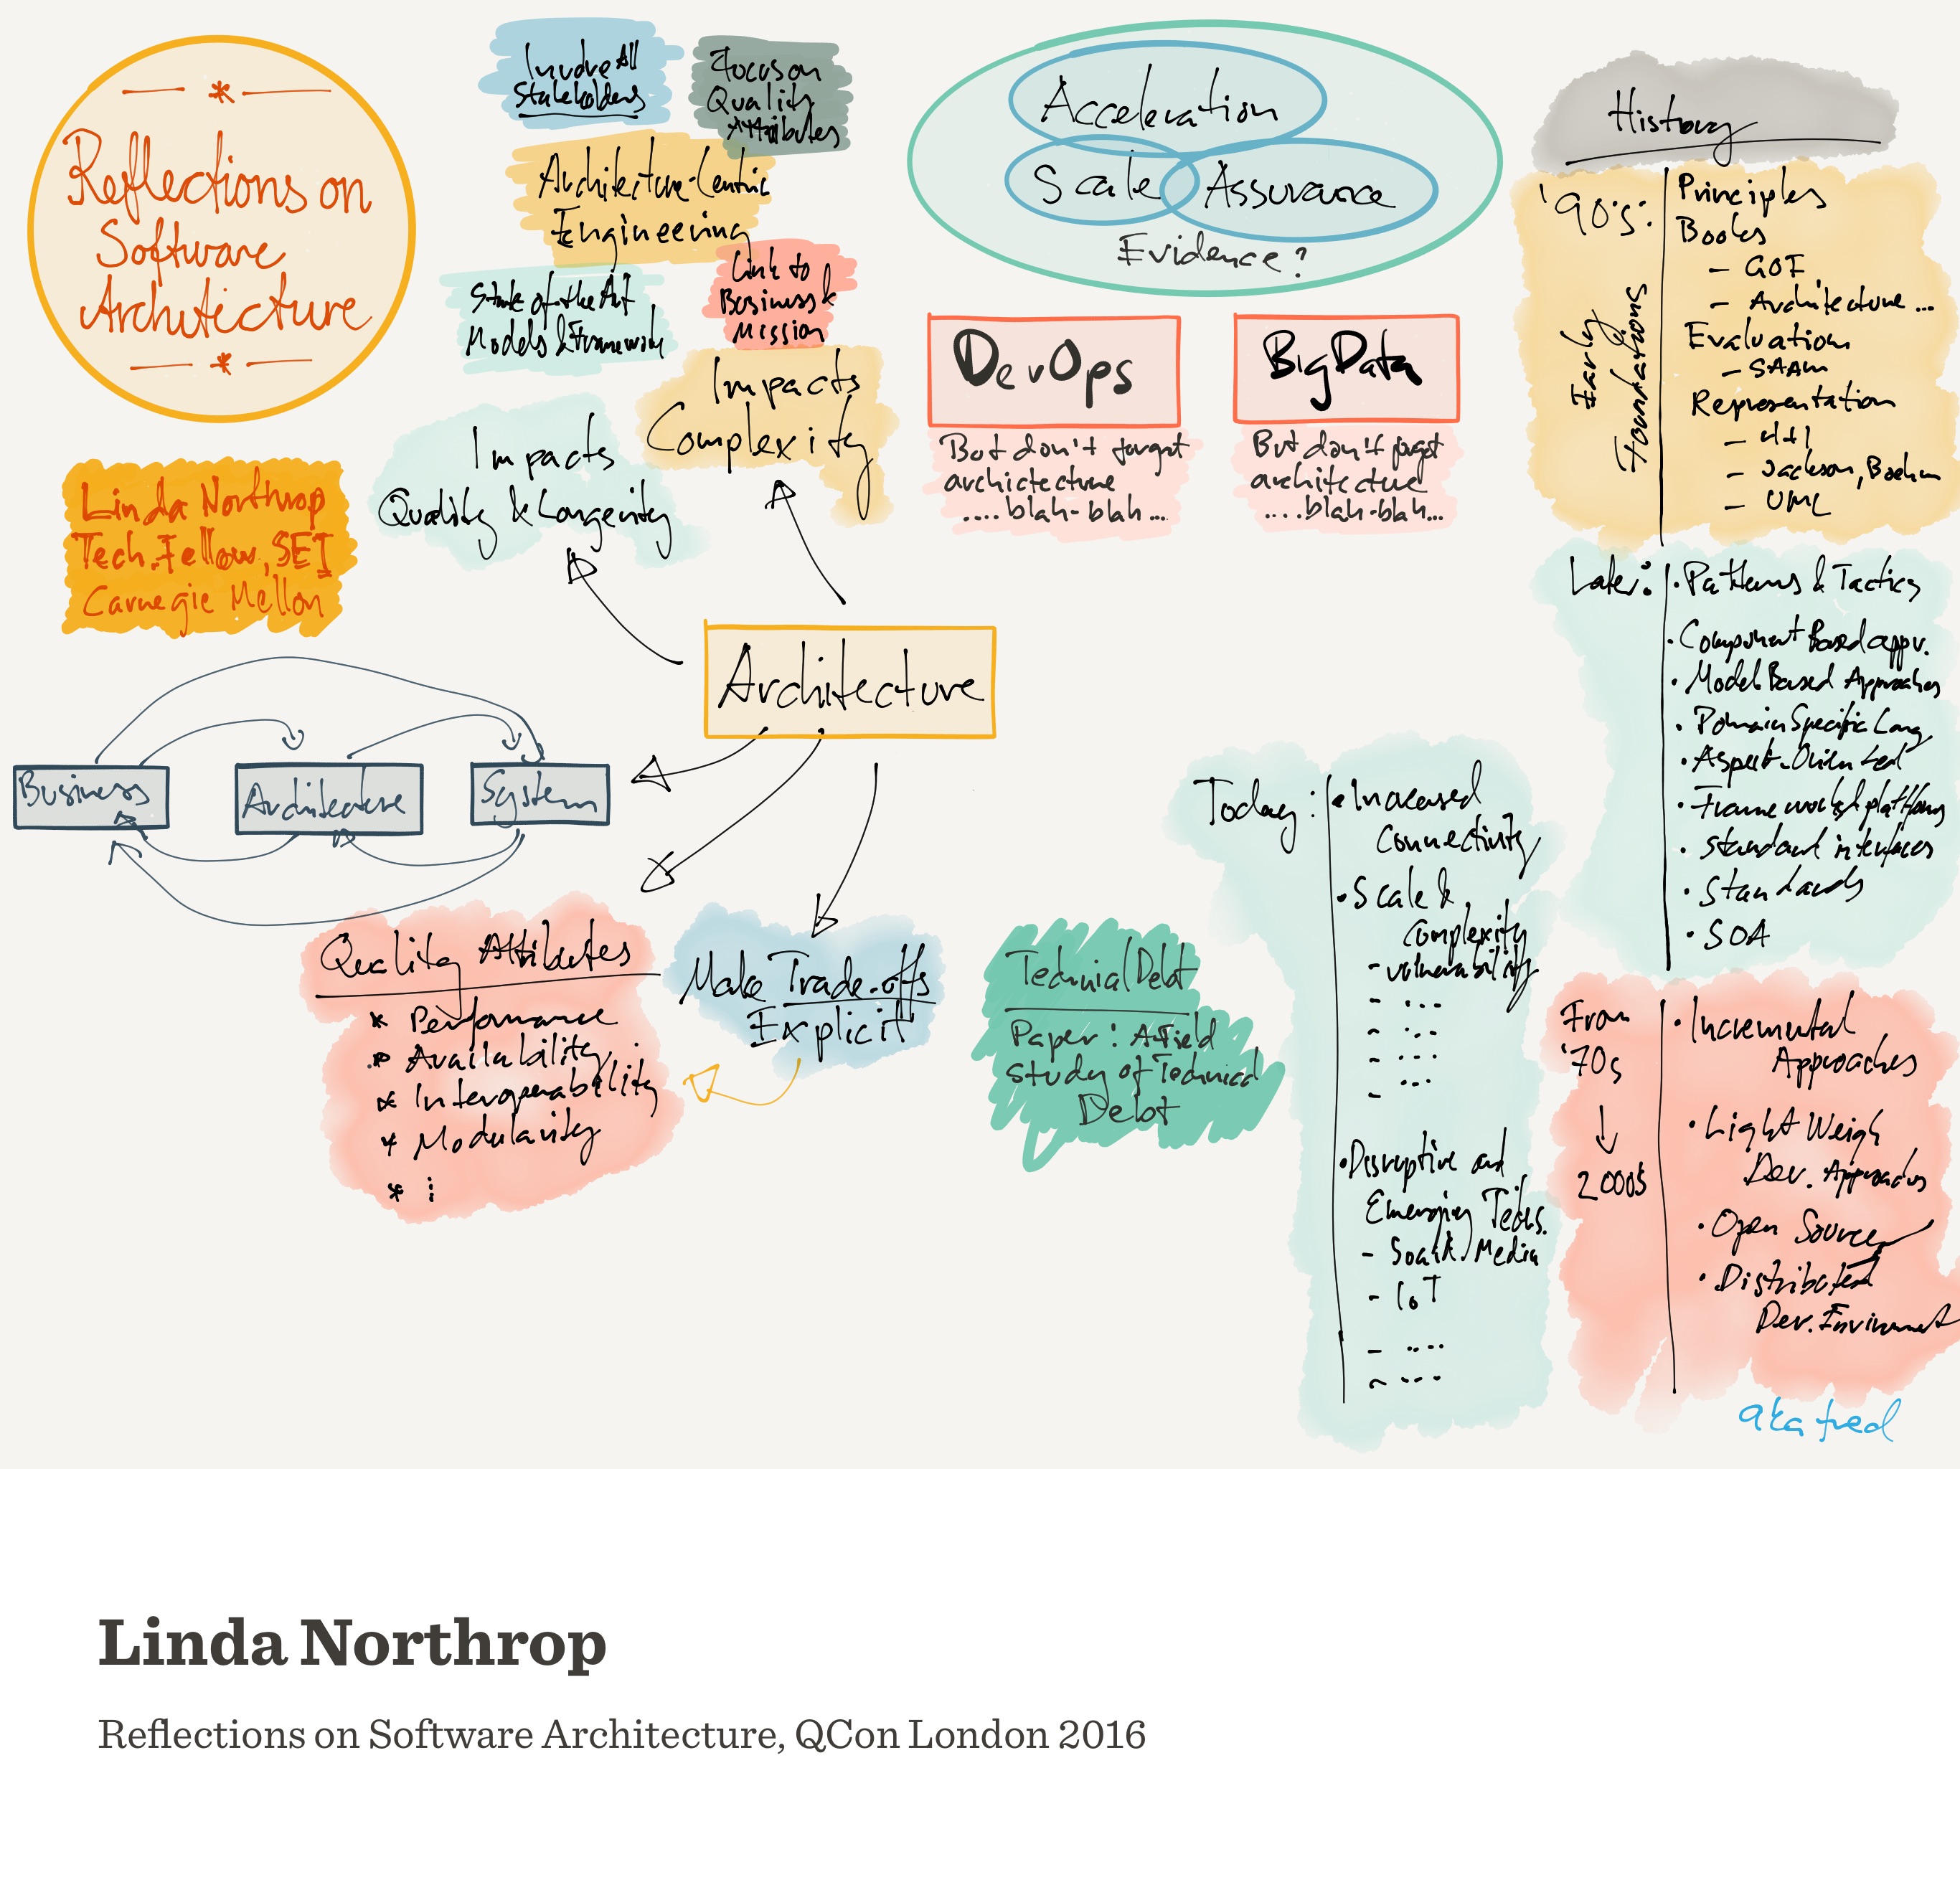 Notes from Reflections on Software Architecture (Linda Northrop)